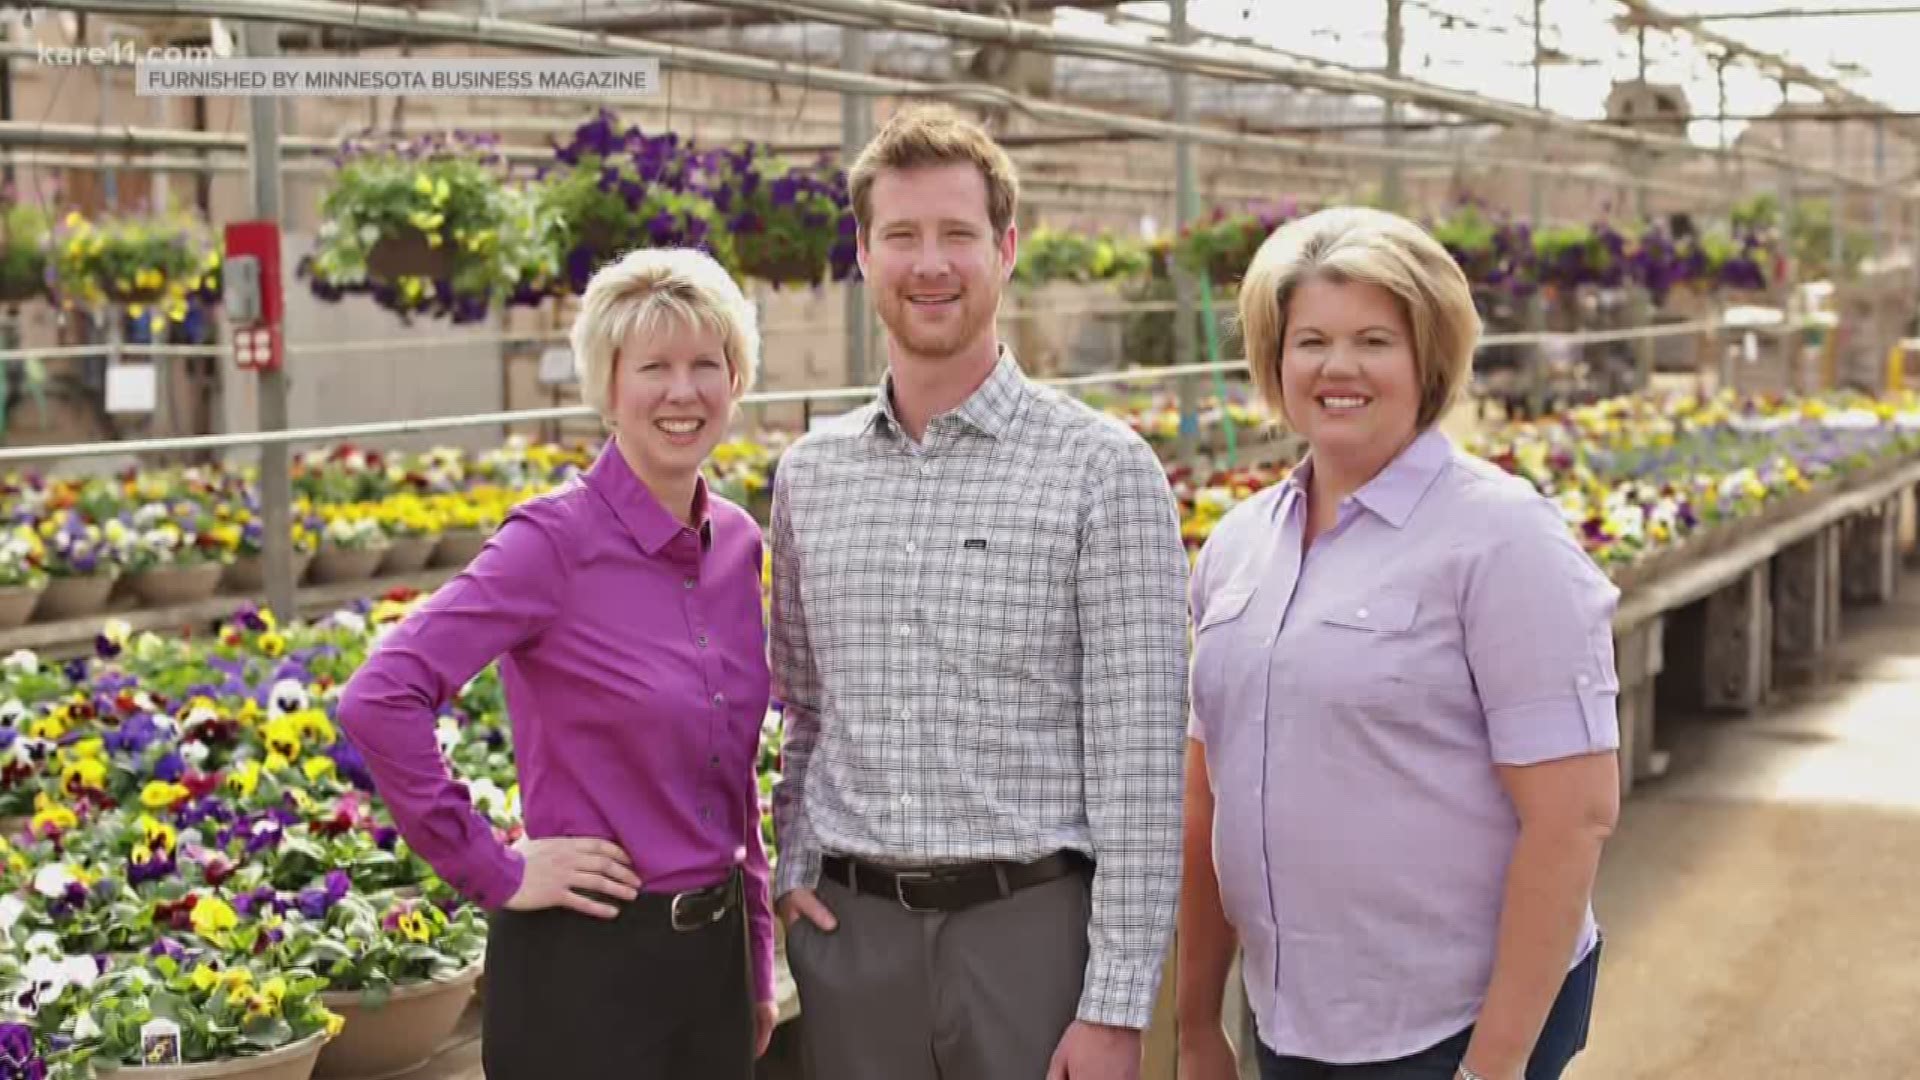 This week in Grow with Kare -- Belinda and Bobby are marking the end of an era.
Dale Bachman is retiring -- and passing along the successful business to a fifth generation.